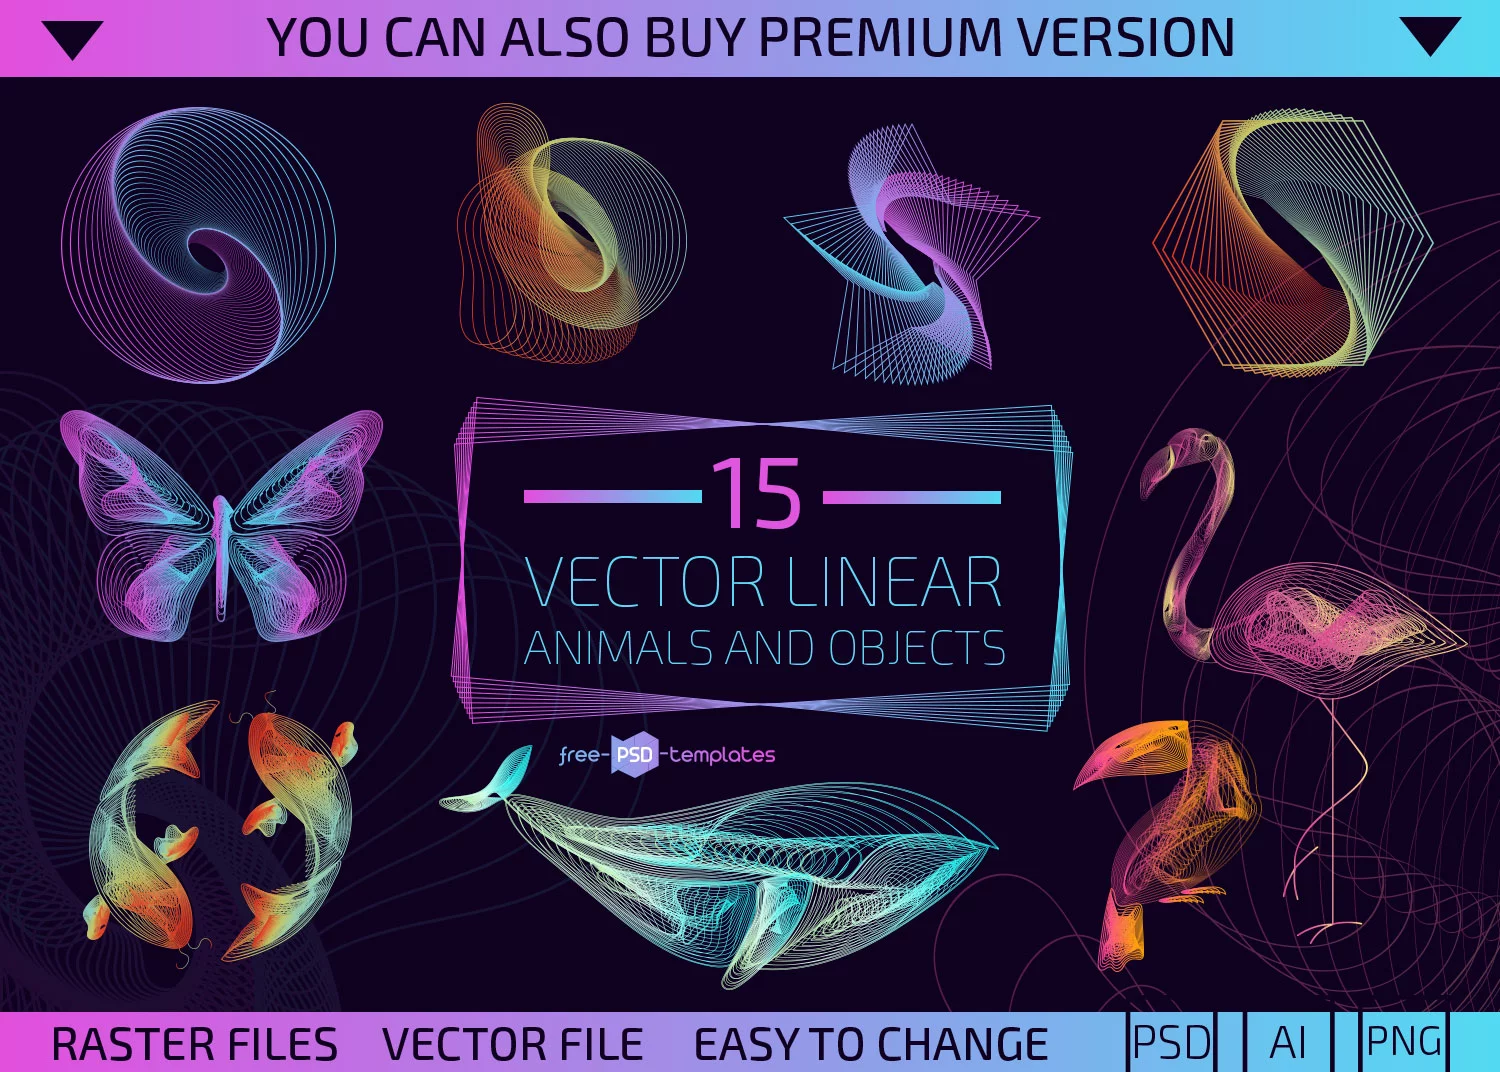 Free Vector Linear Animals and Objects + Premium Version